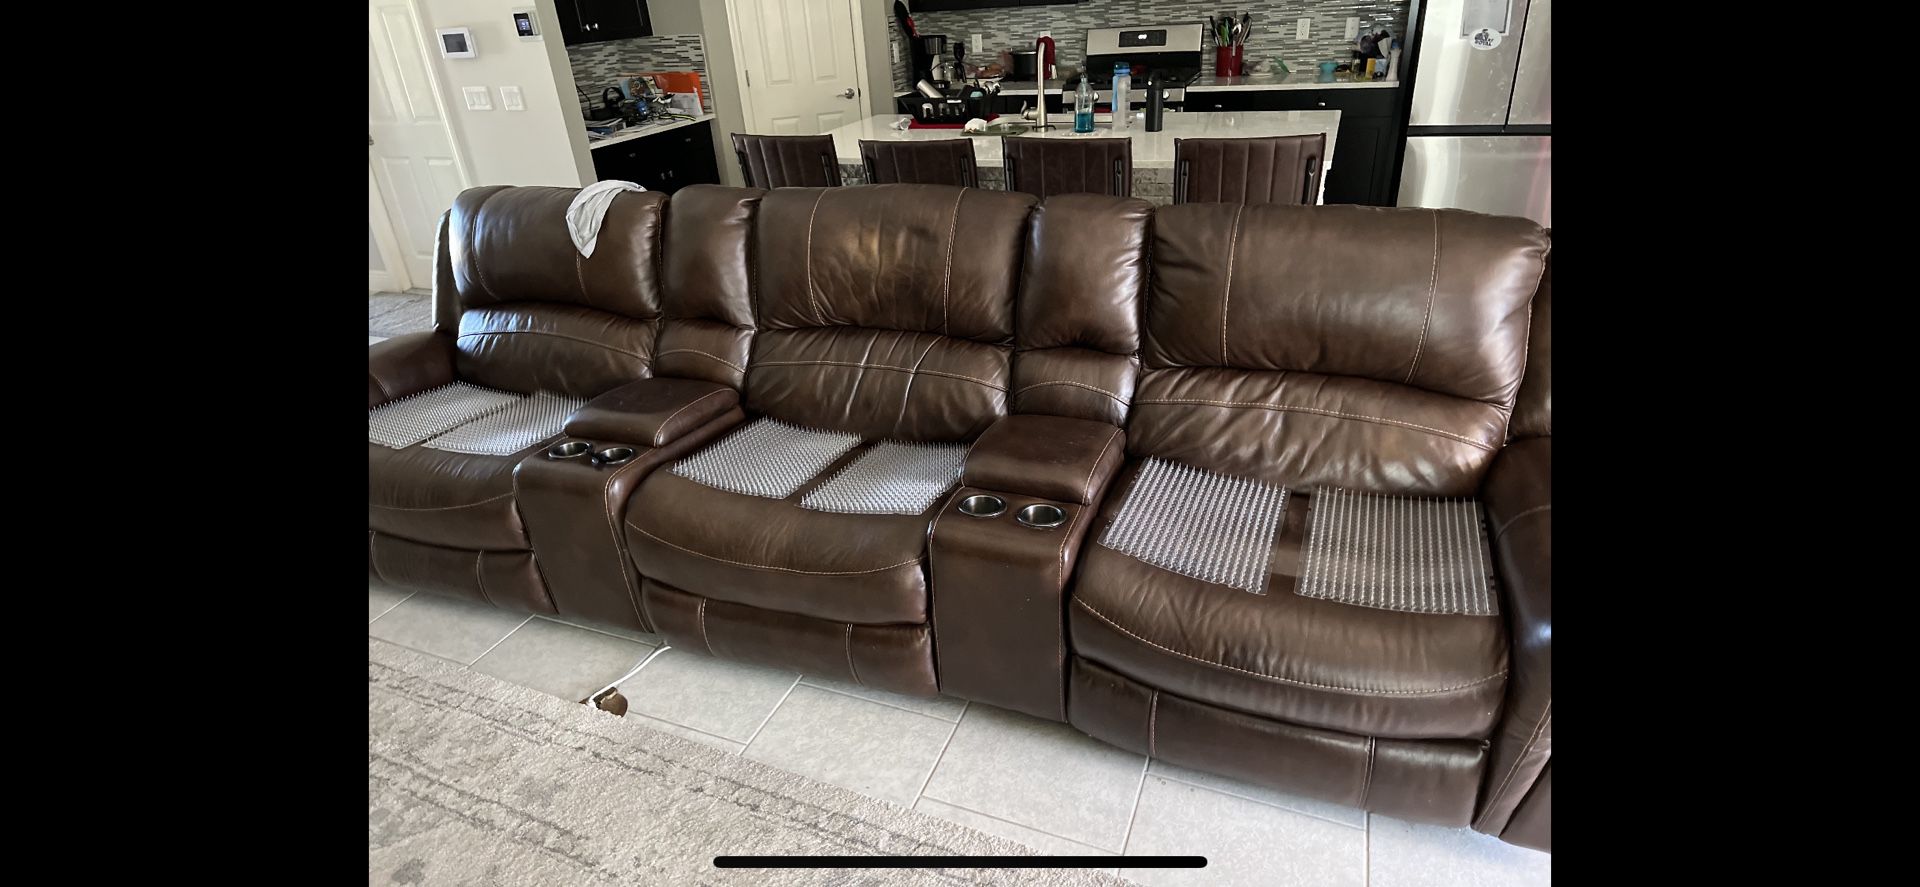 Great condition couch three electric recliner 